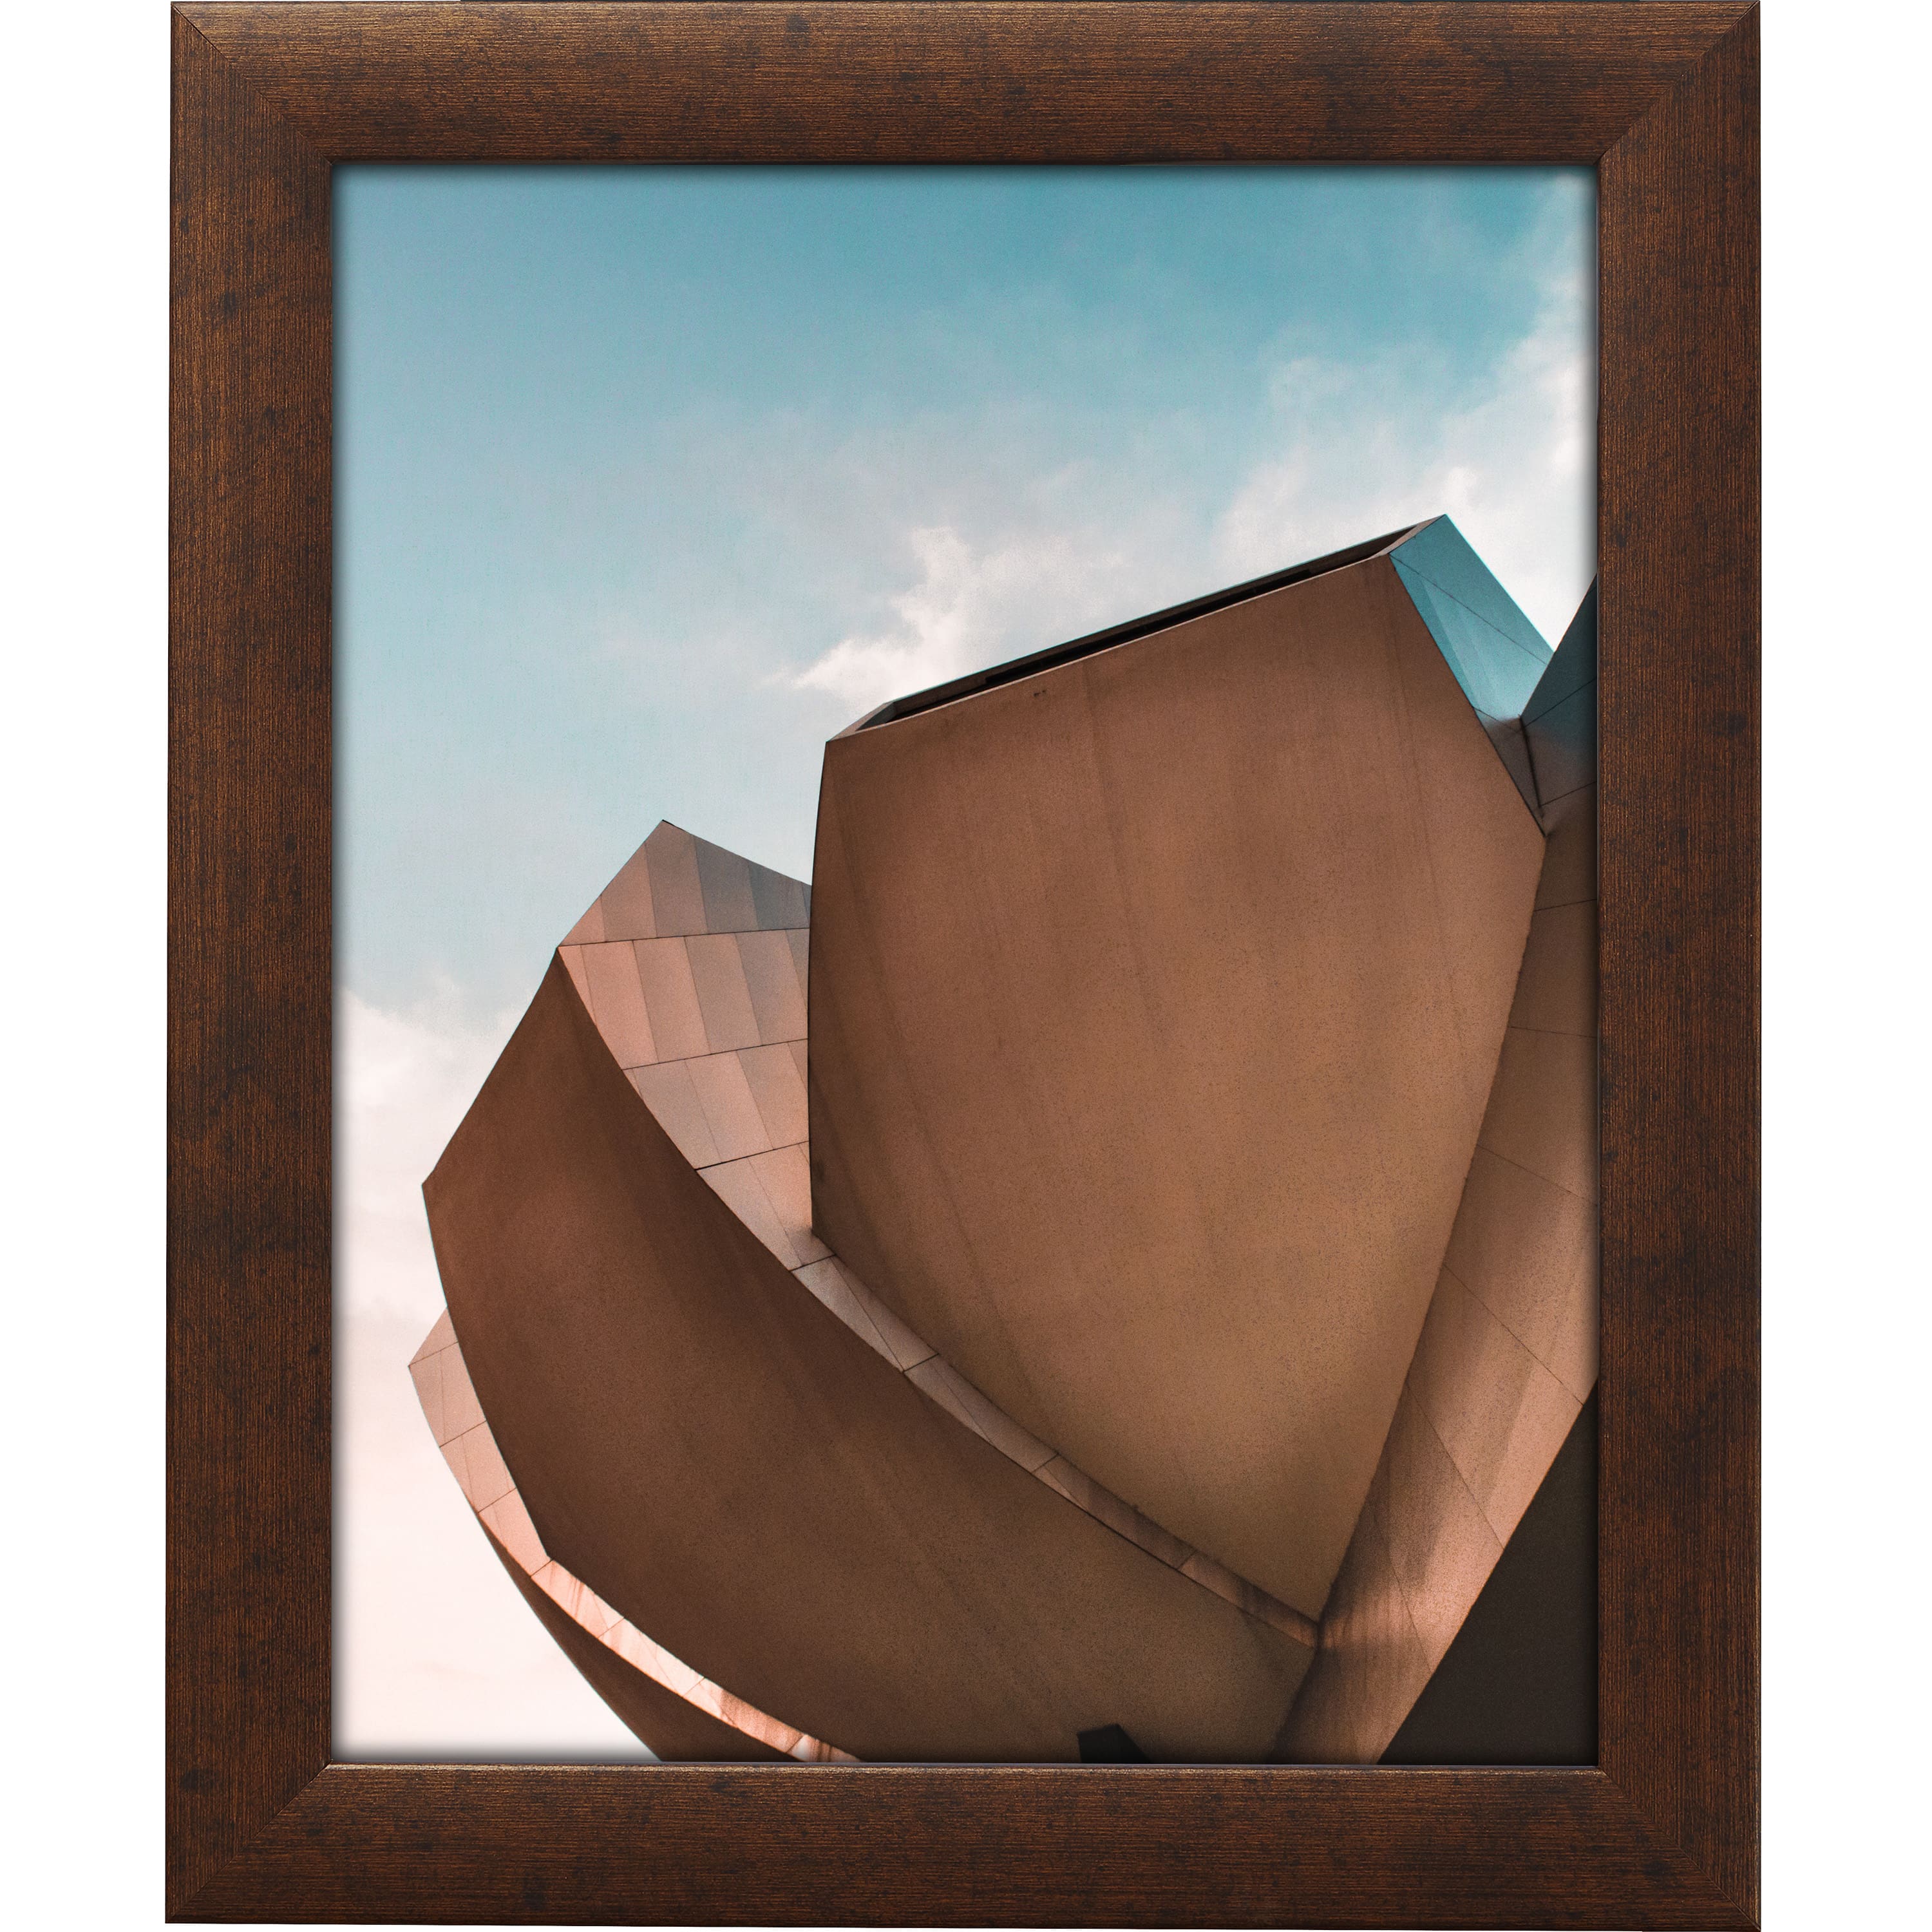 Craig Frames Contemporary Rustic Copper Picture Frame